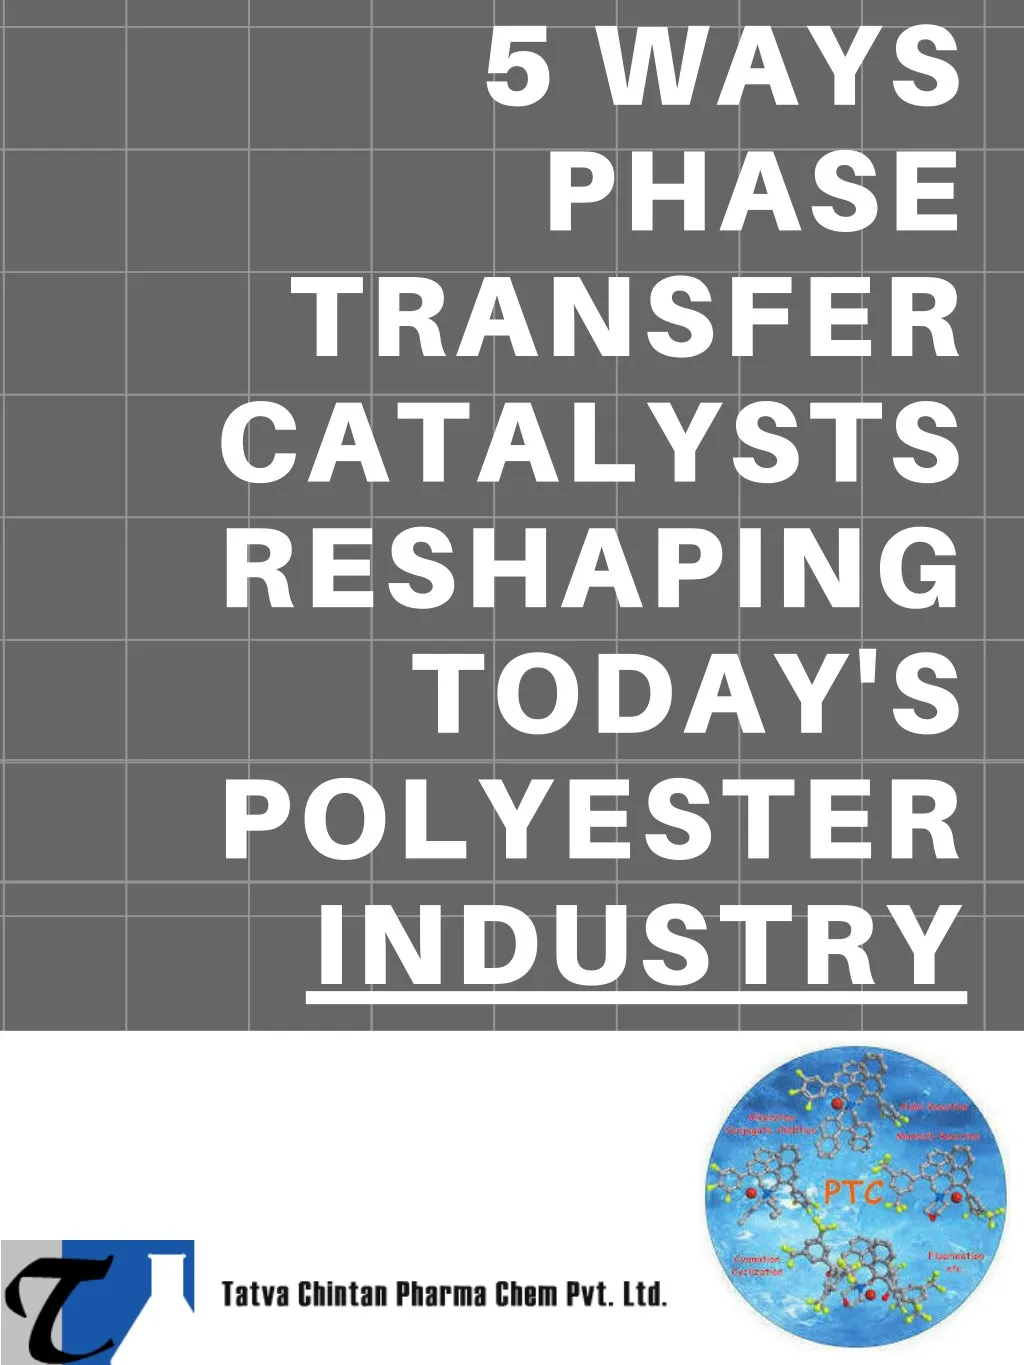 5 ways phase transfer catalysts reshaping today